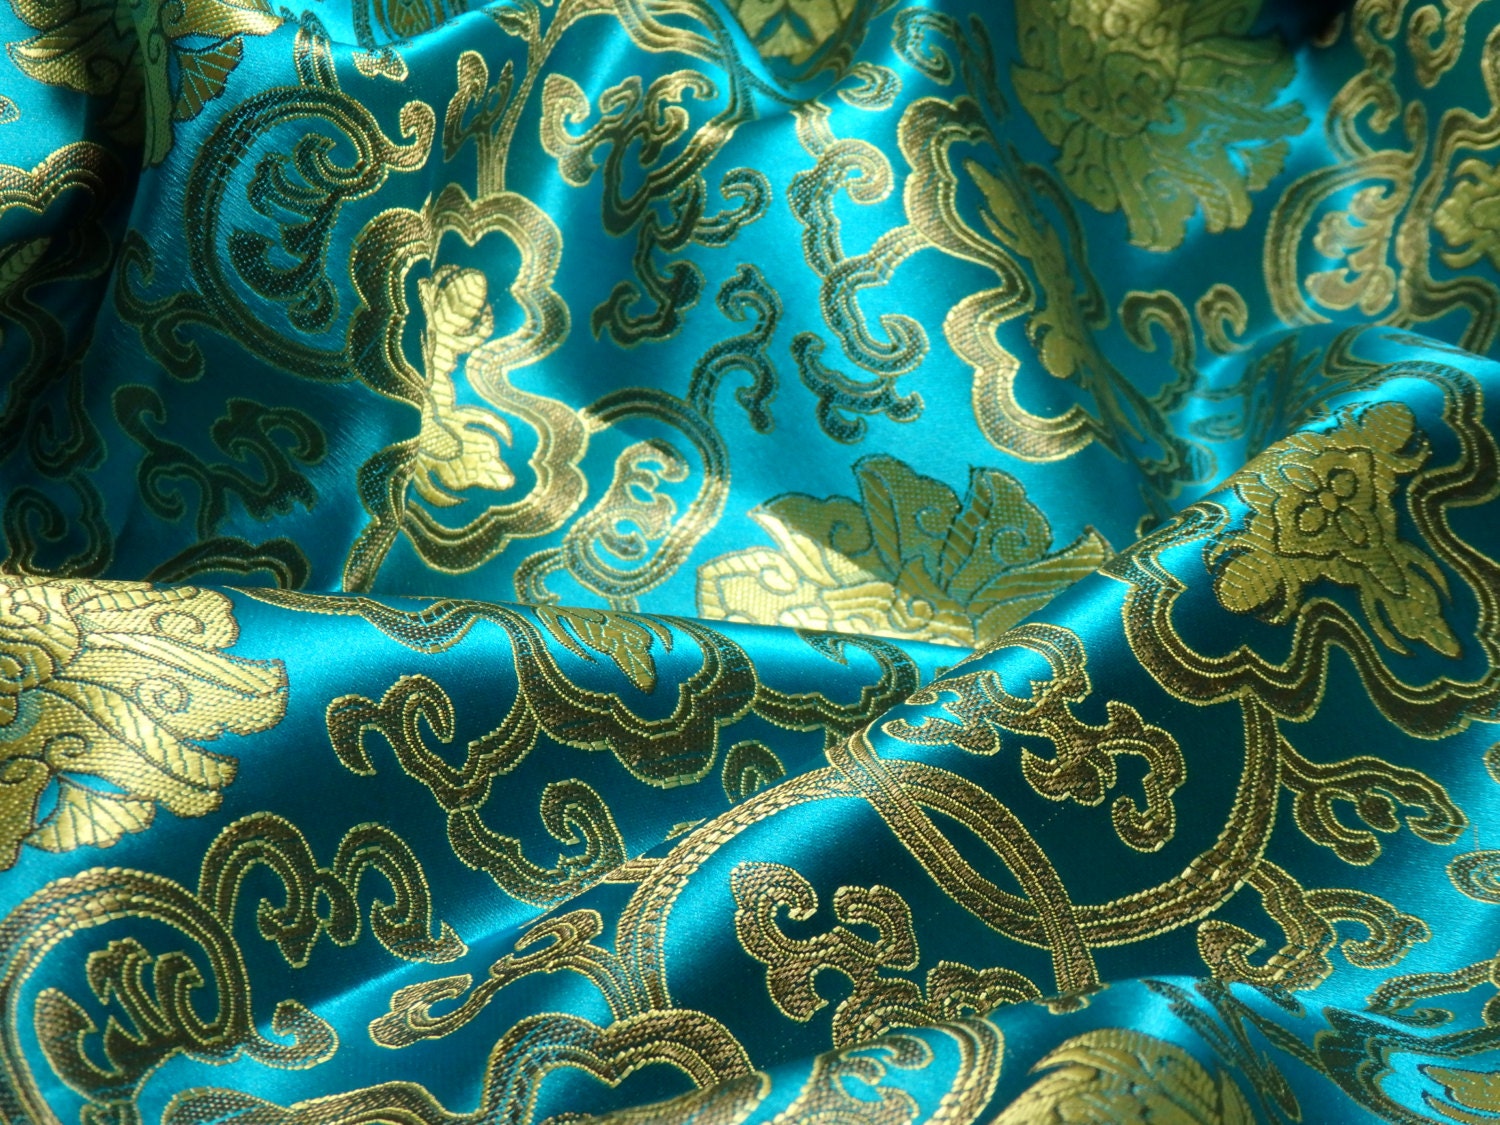 Chinese satin brocade in turquoise and gold 1 yard of